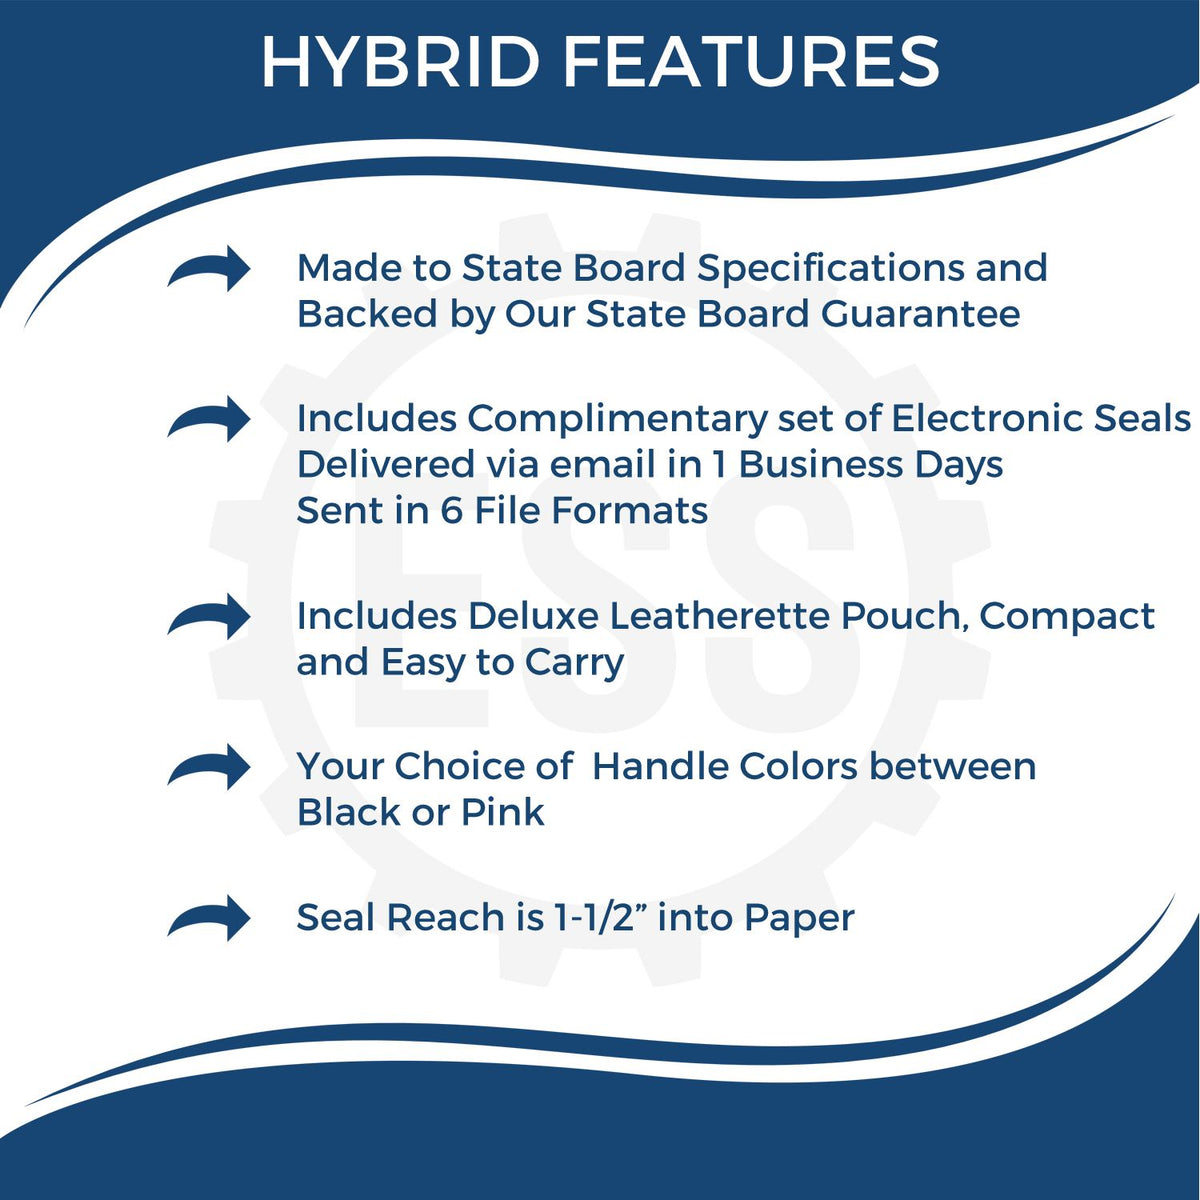 A picture of an infographic highlighting the selling points for the Hybrid Kentucky Land Surveyor Seal